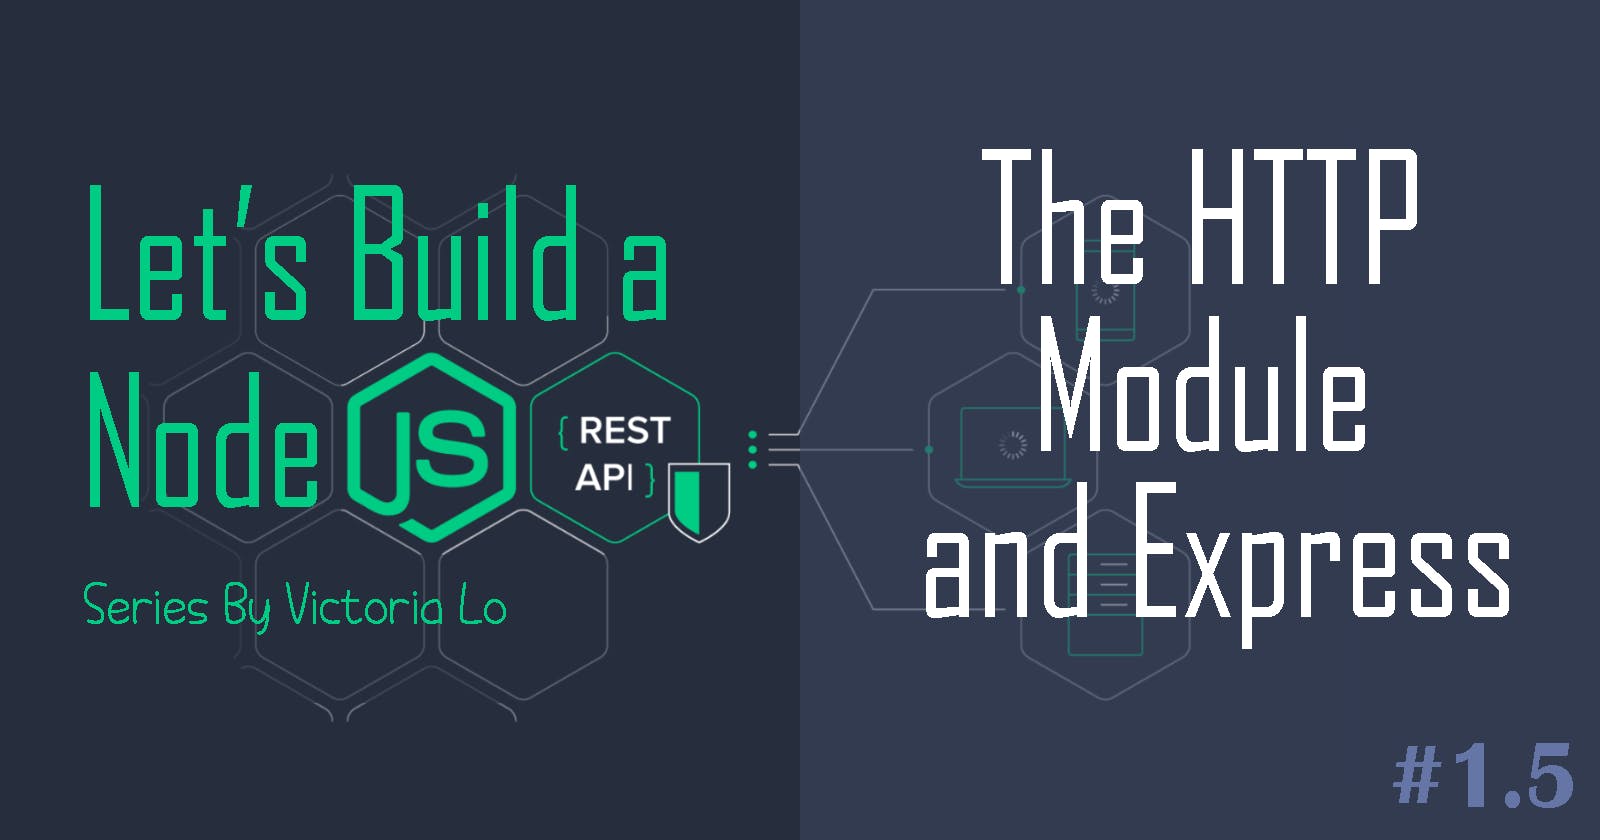 Build a REST API with : HTTP Module & Express